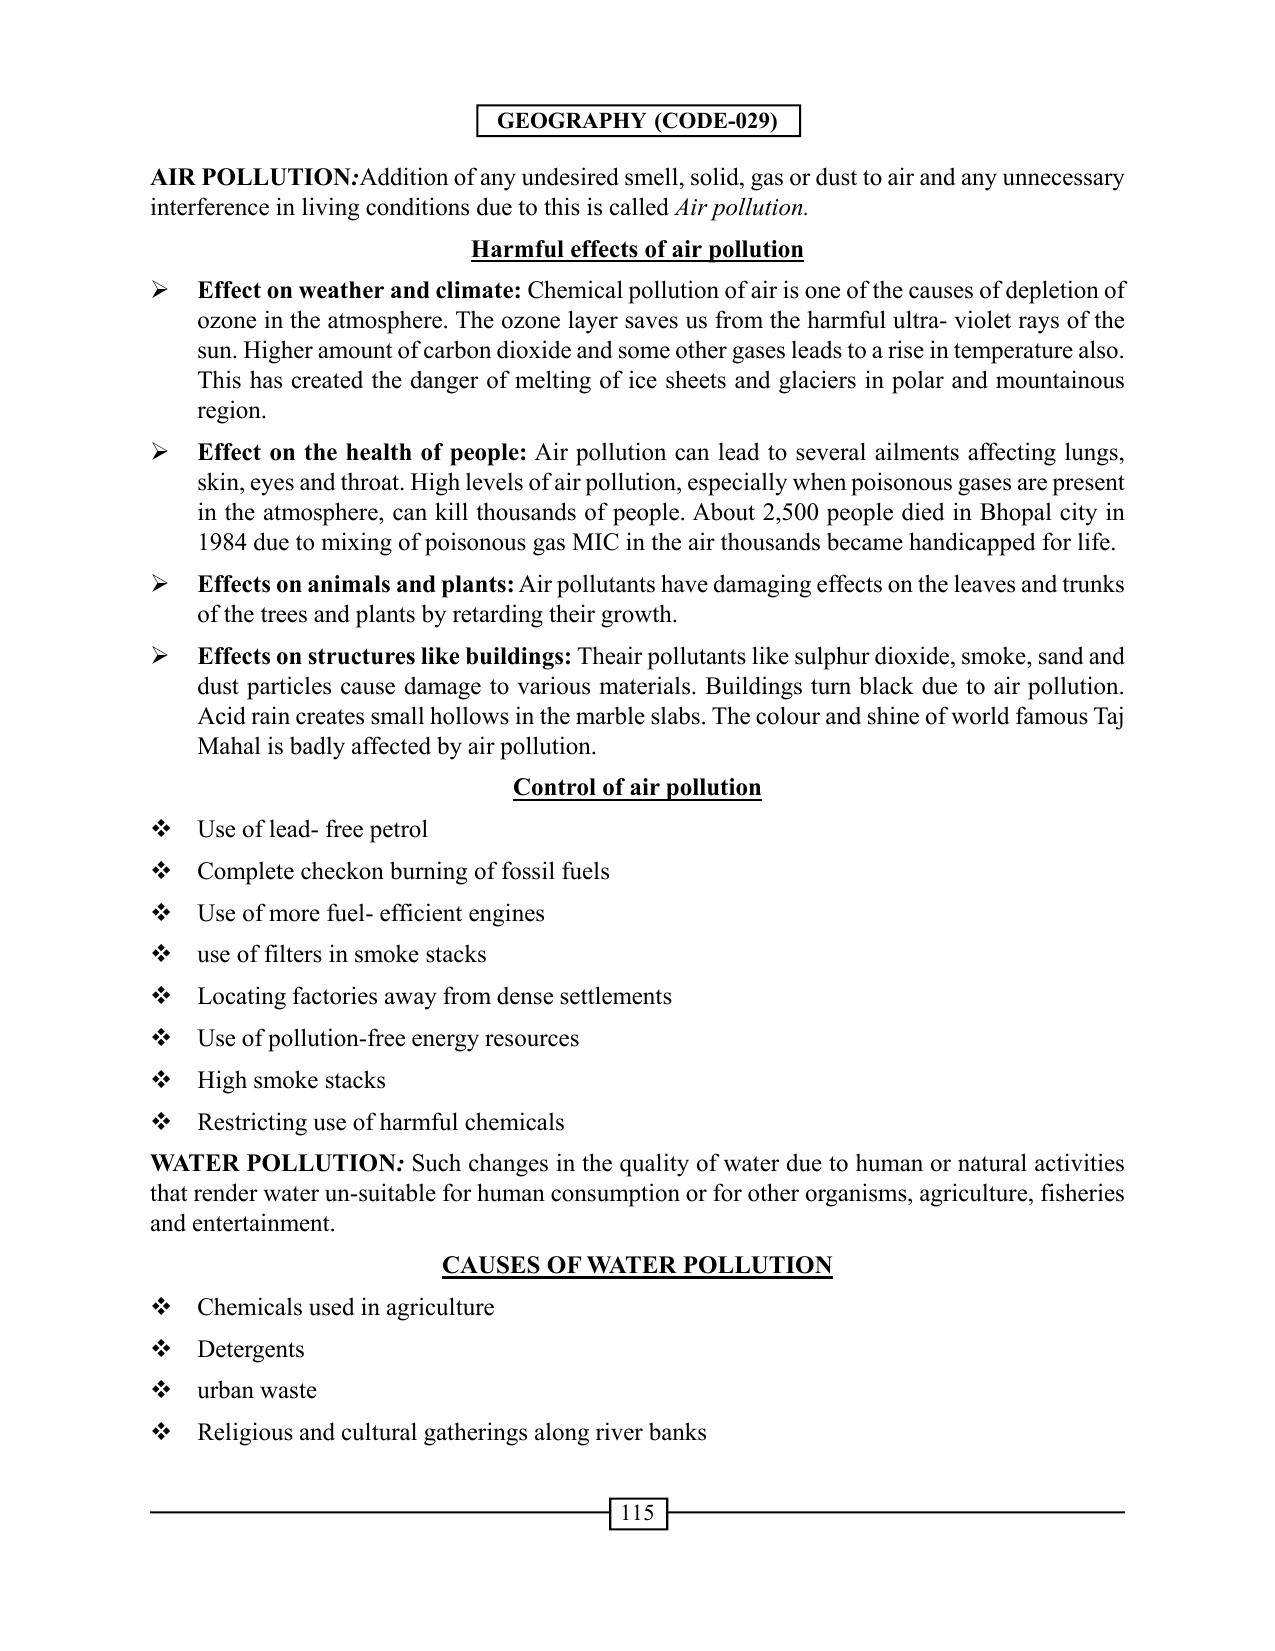 CBSE Worksheets for Class 12 Geography Geographical Perspective on Selected Issues and Problems - Page 2